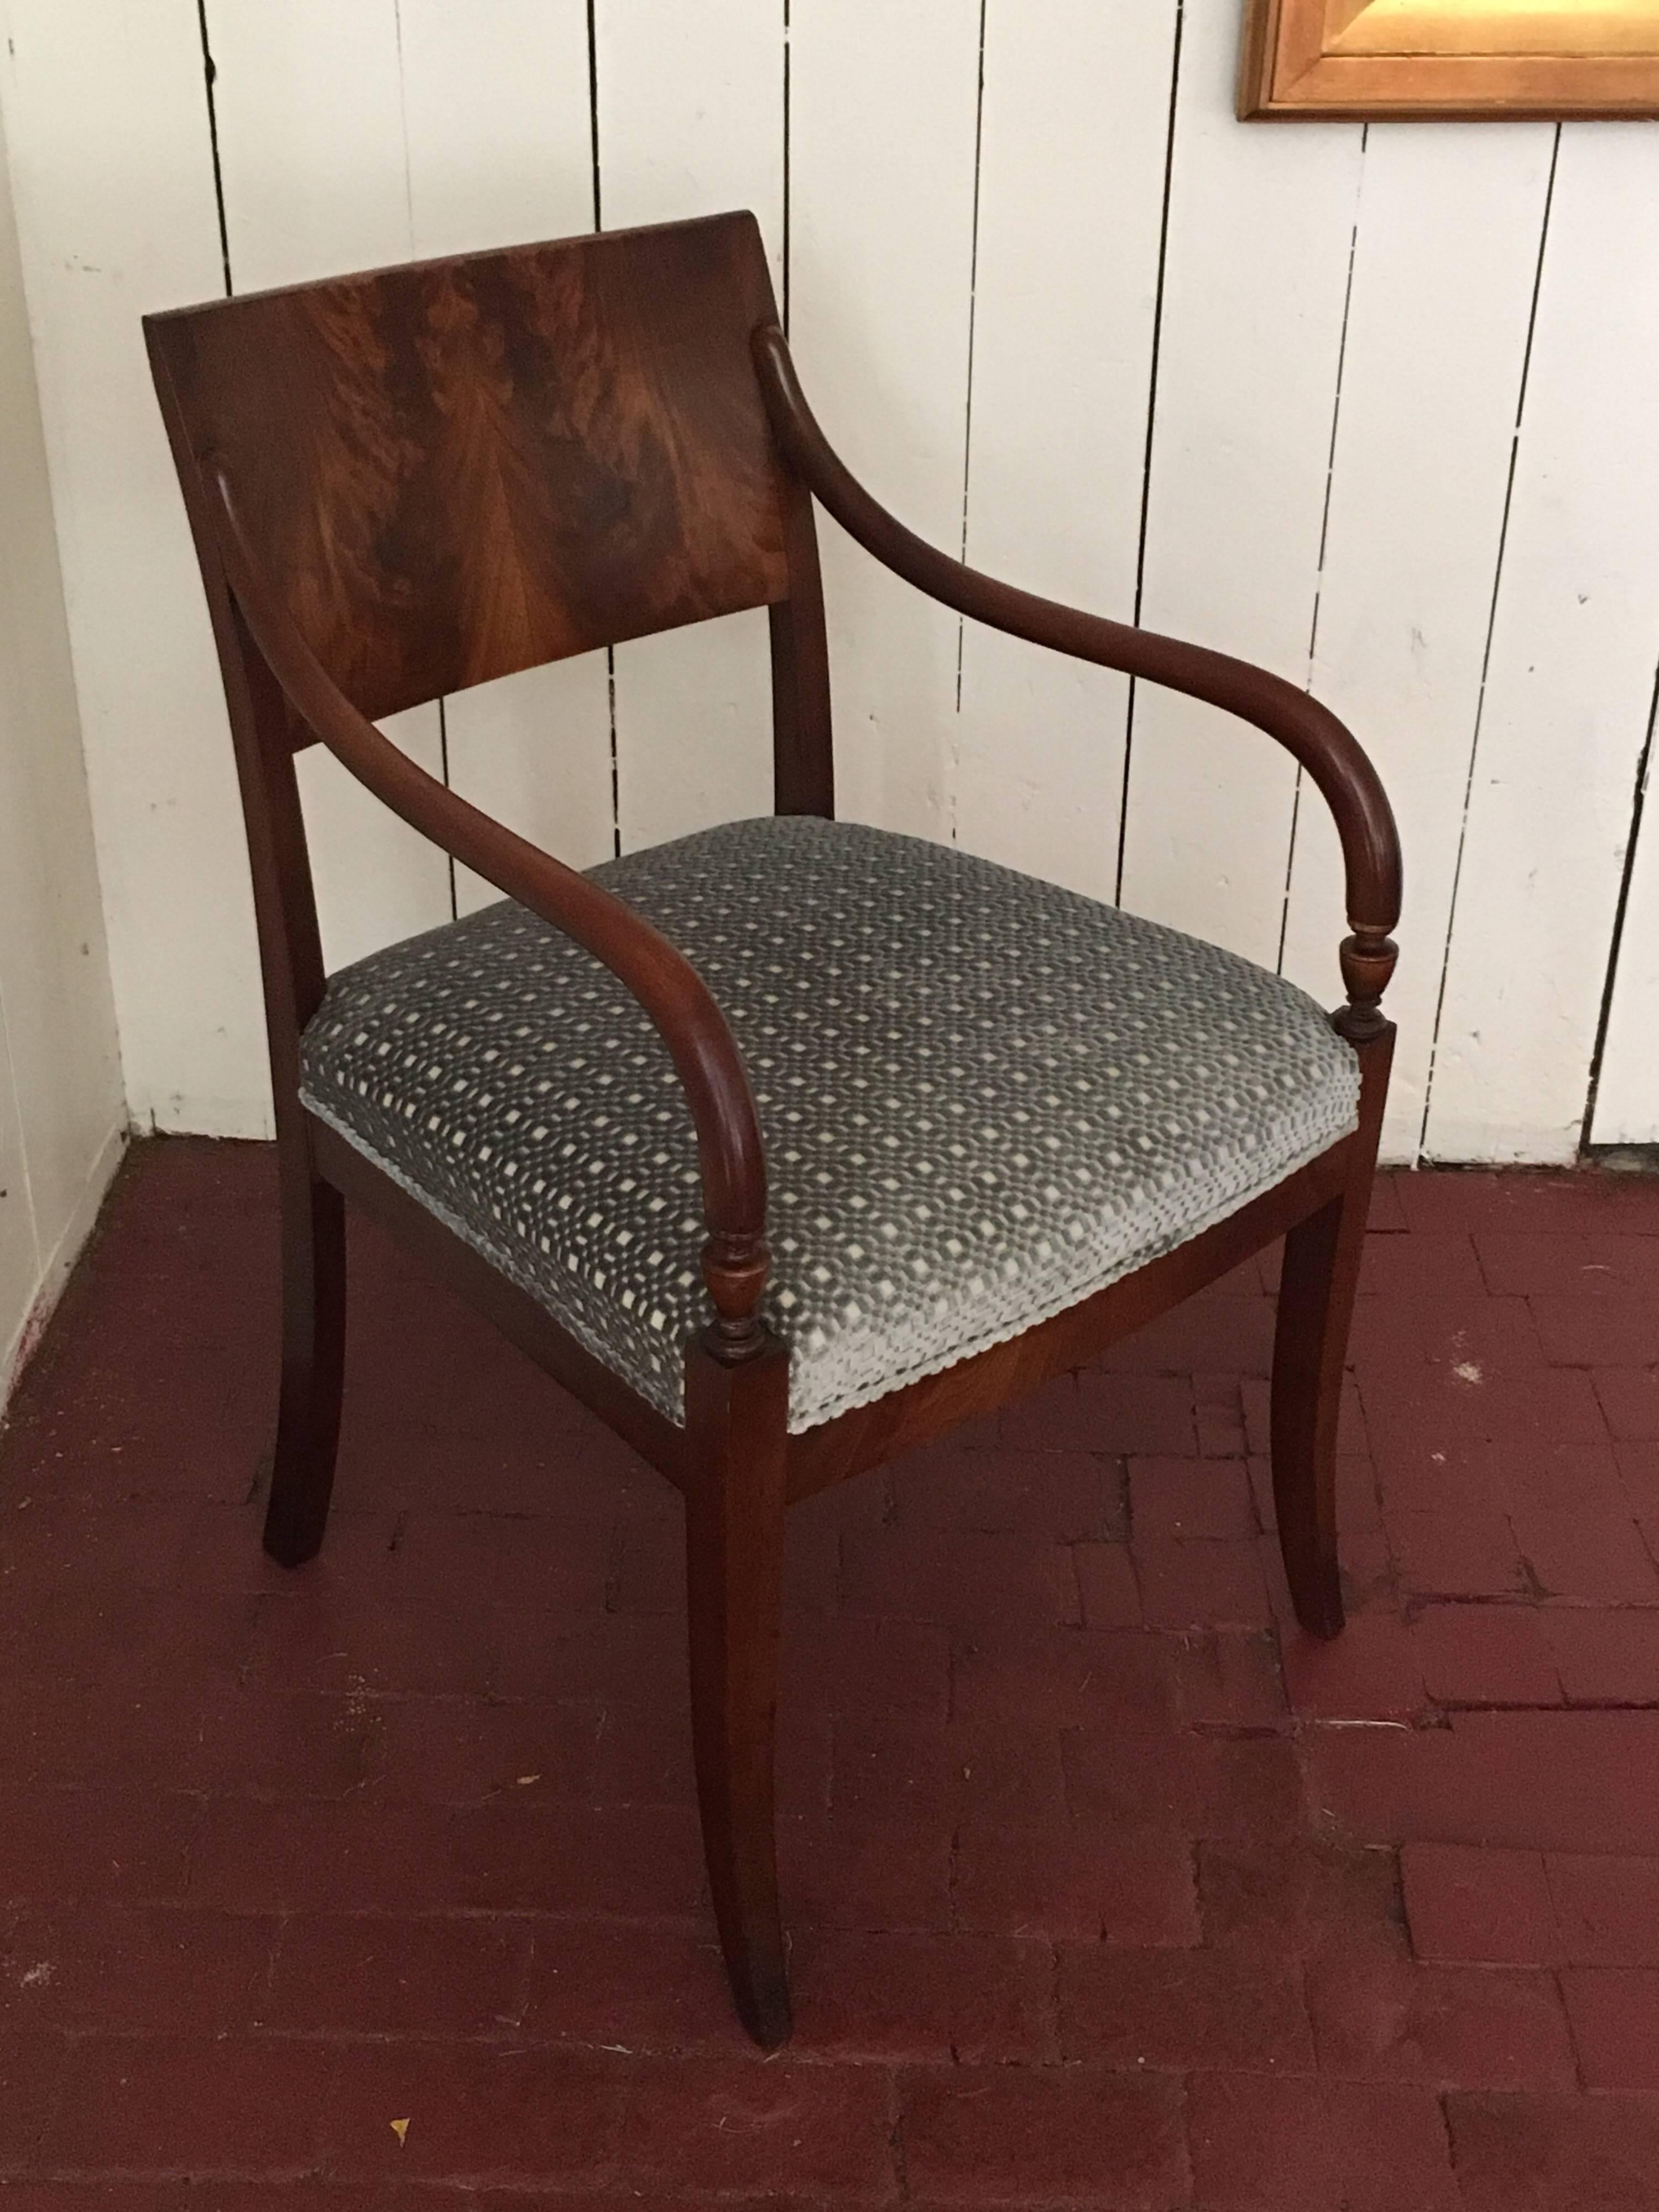 Stunning Danish Empire armchair with all the gracious and classic elegance of the era, ca. 1840. This is a perfect piece for additional seating or even as a desk chair. Simple yet striking in design, the early 19th century Danish Empire style served